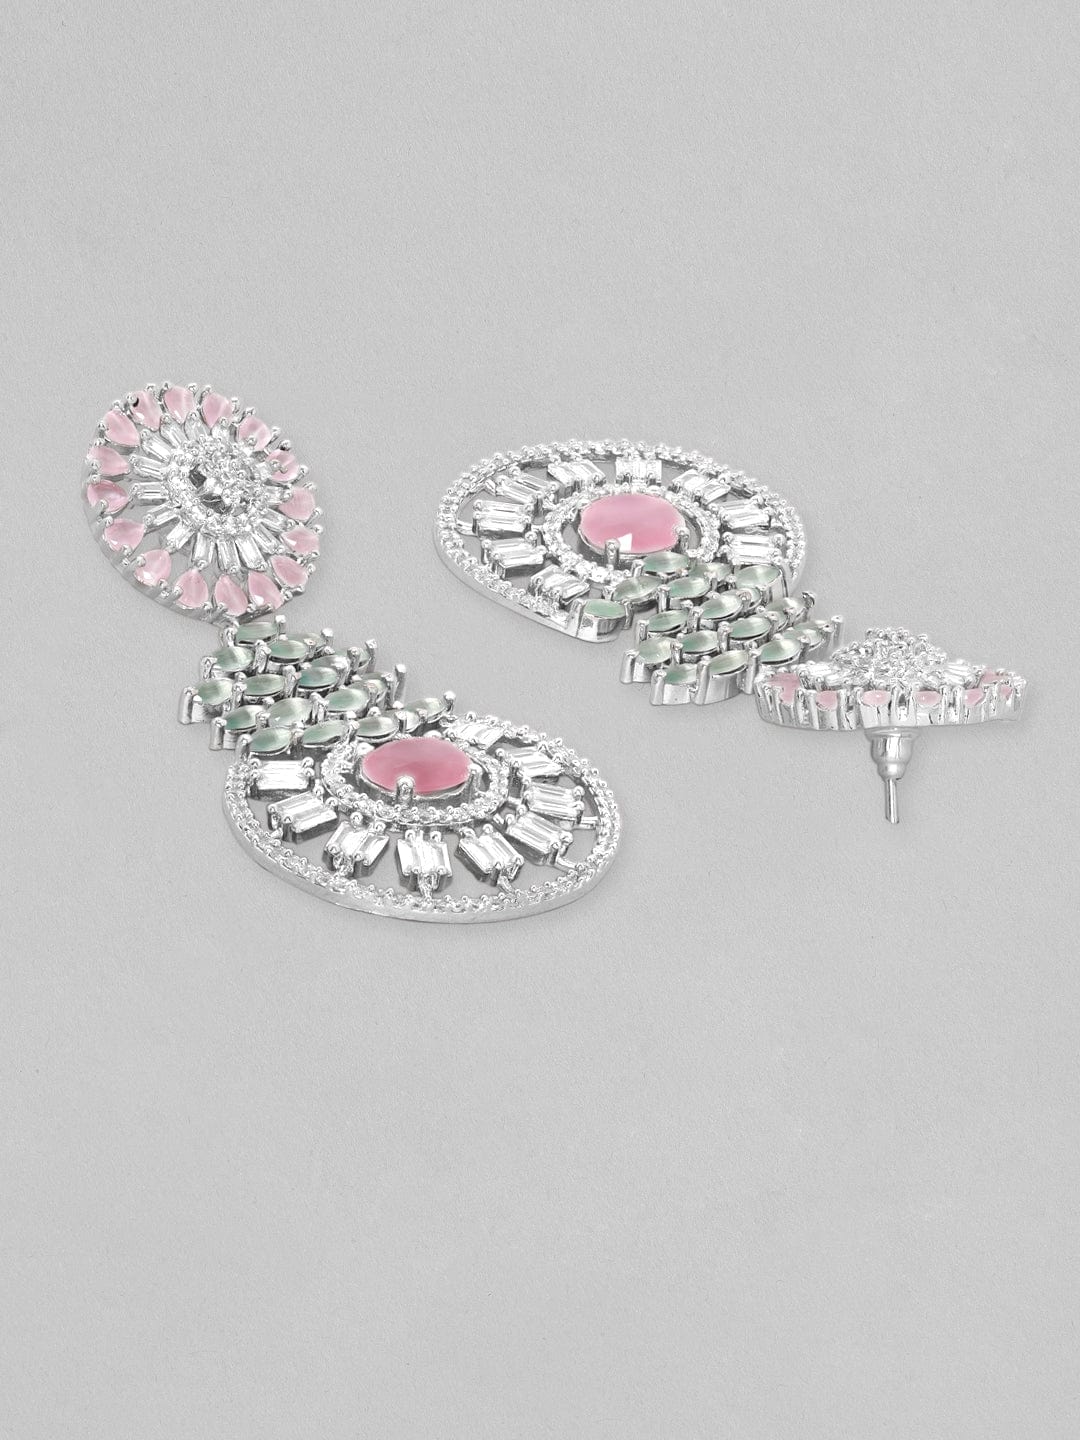 Rubans AD Pink Stone Round Cocktail Earrings Earrings